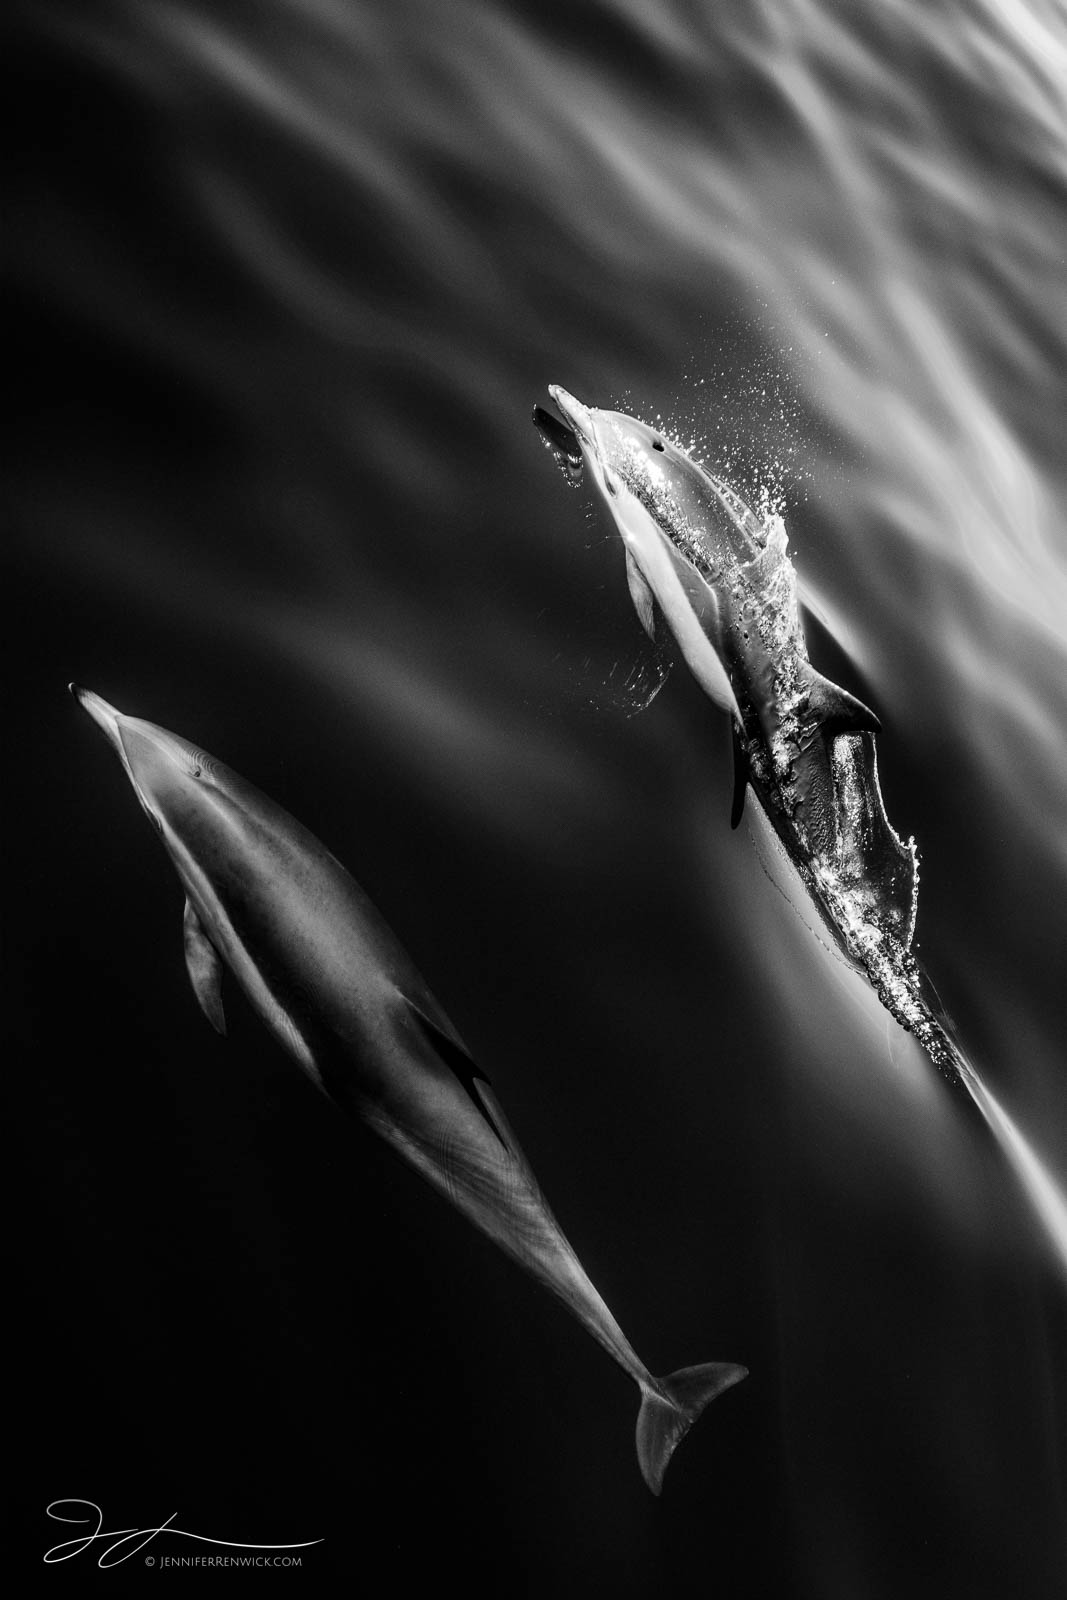 Two common dolphins travel through the ocean. This image is part of my "A Morning With Dolphins" photo project. You can see the...